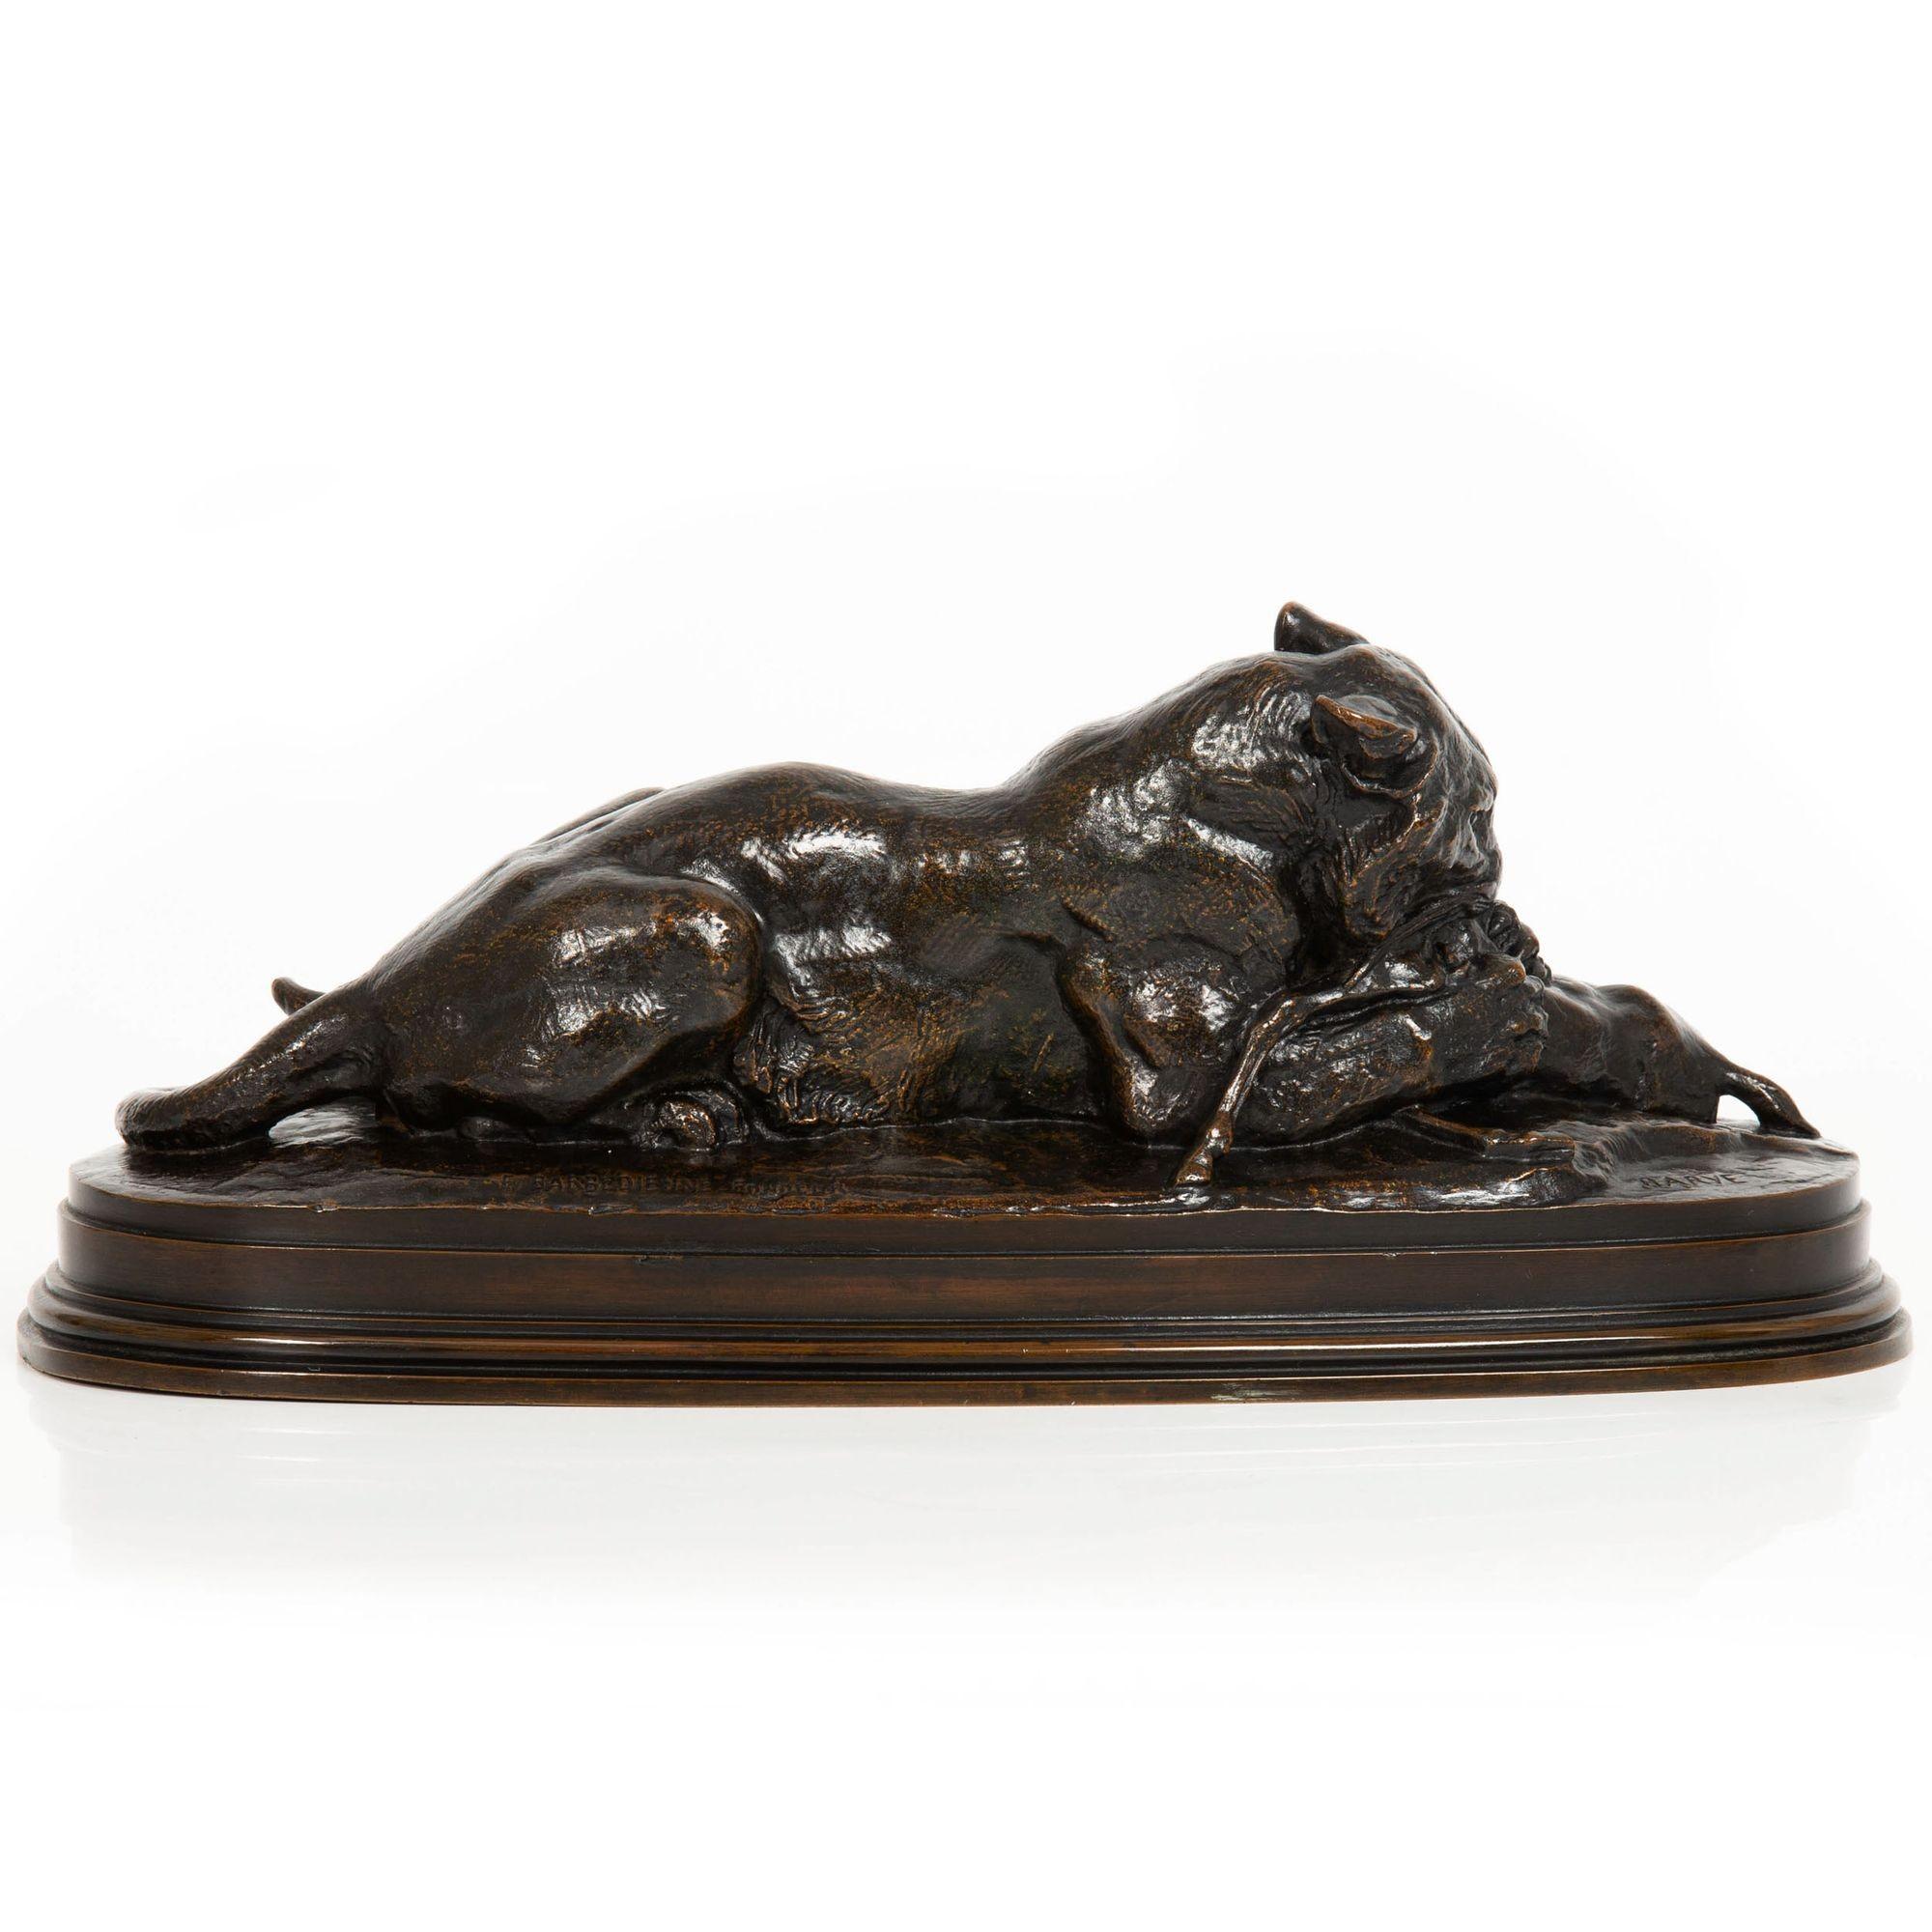 Romantic French Bronze Sculpture “Tiger Devouring Gazelle” after Antoine-Louis Barye For Sale